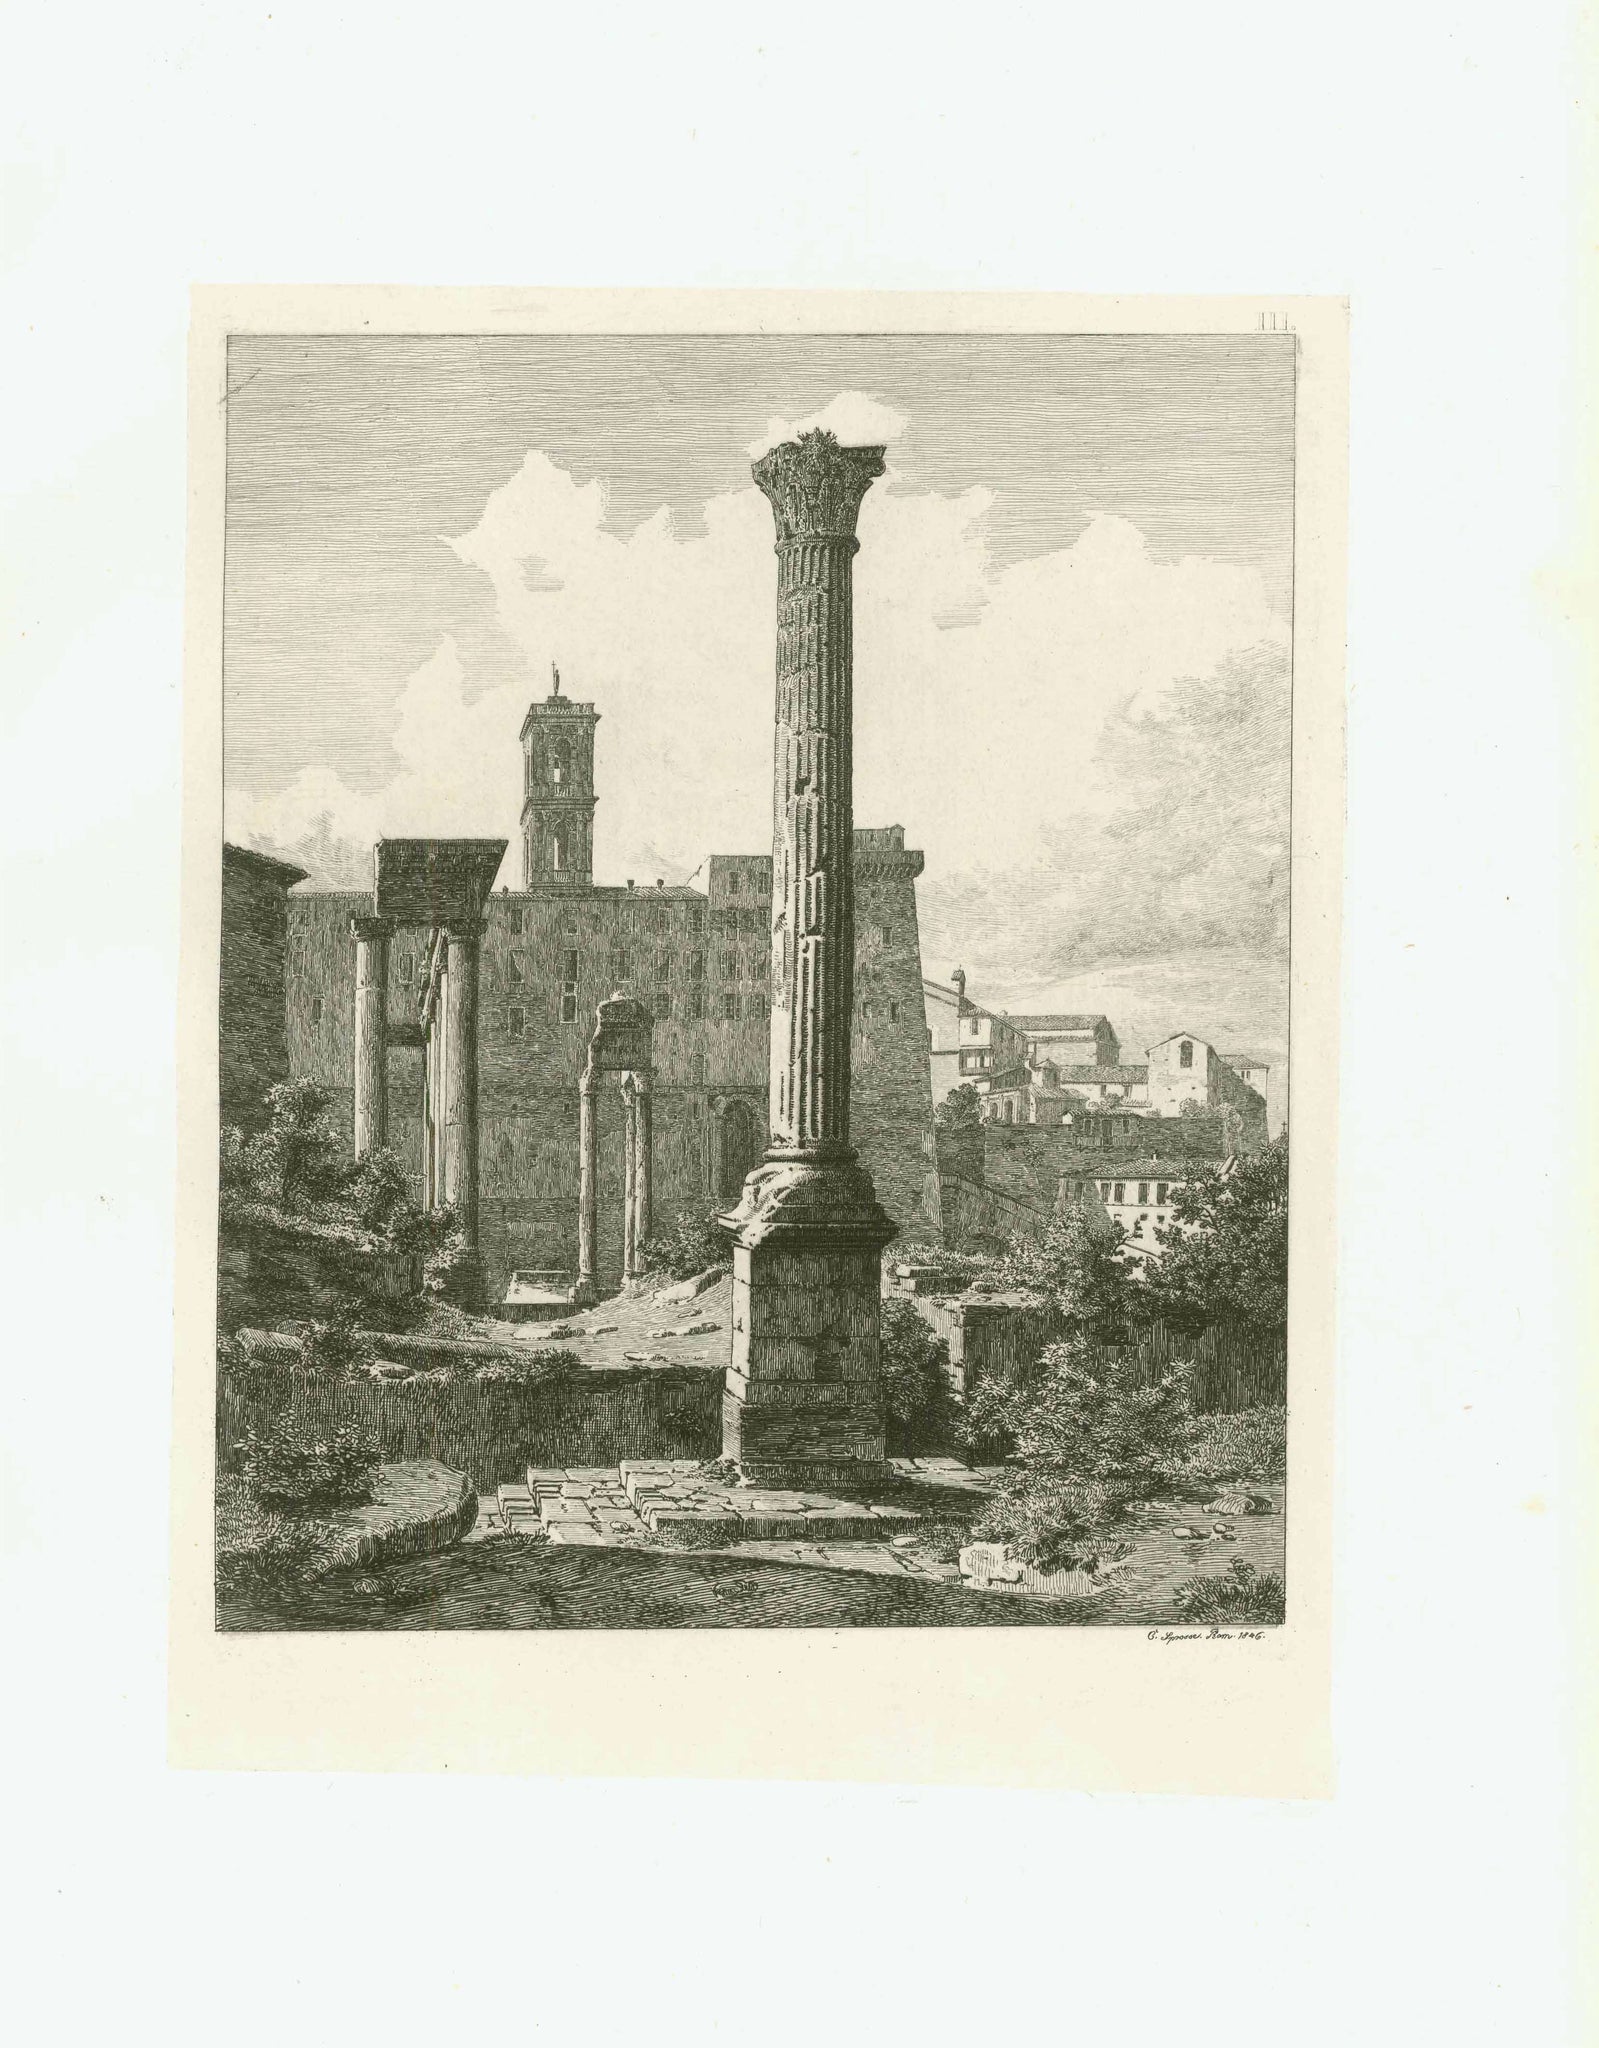 Rome. - Three copper etchings together:  Forum Romanum. Partial view.  Copper etching by Carl Ferdinand Sprosse ( 1819-1874)  Dated 1846  Published in ãVedute del Foro Romano designate e intagliate in Rame"  By Carlo Sprosse  Rome, 1857